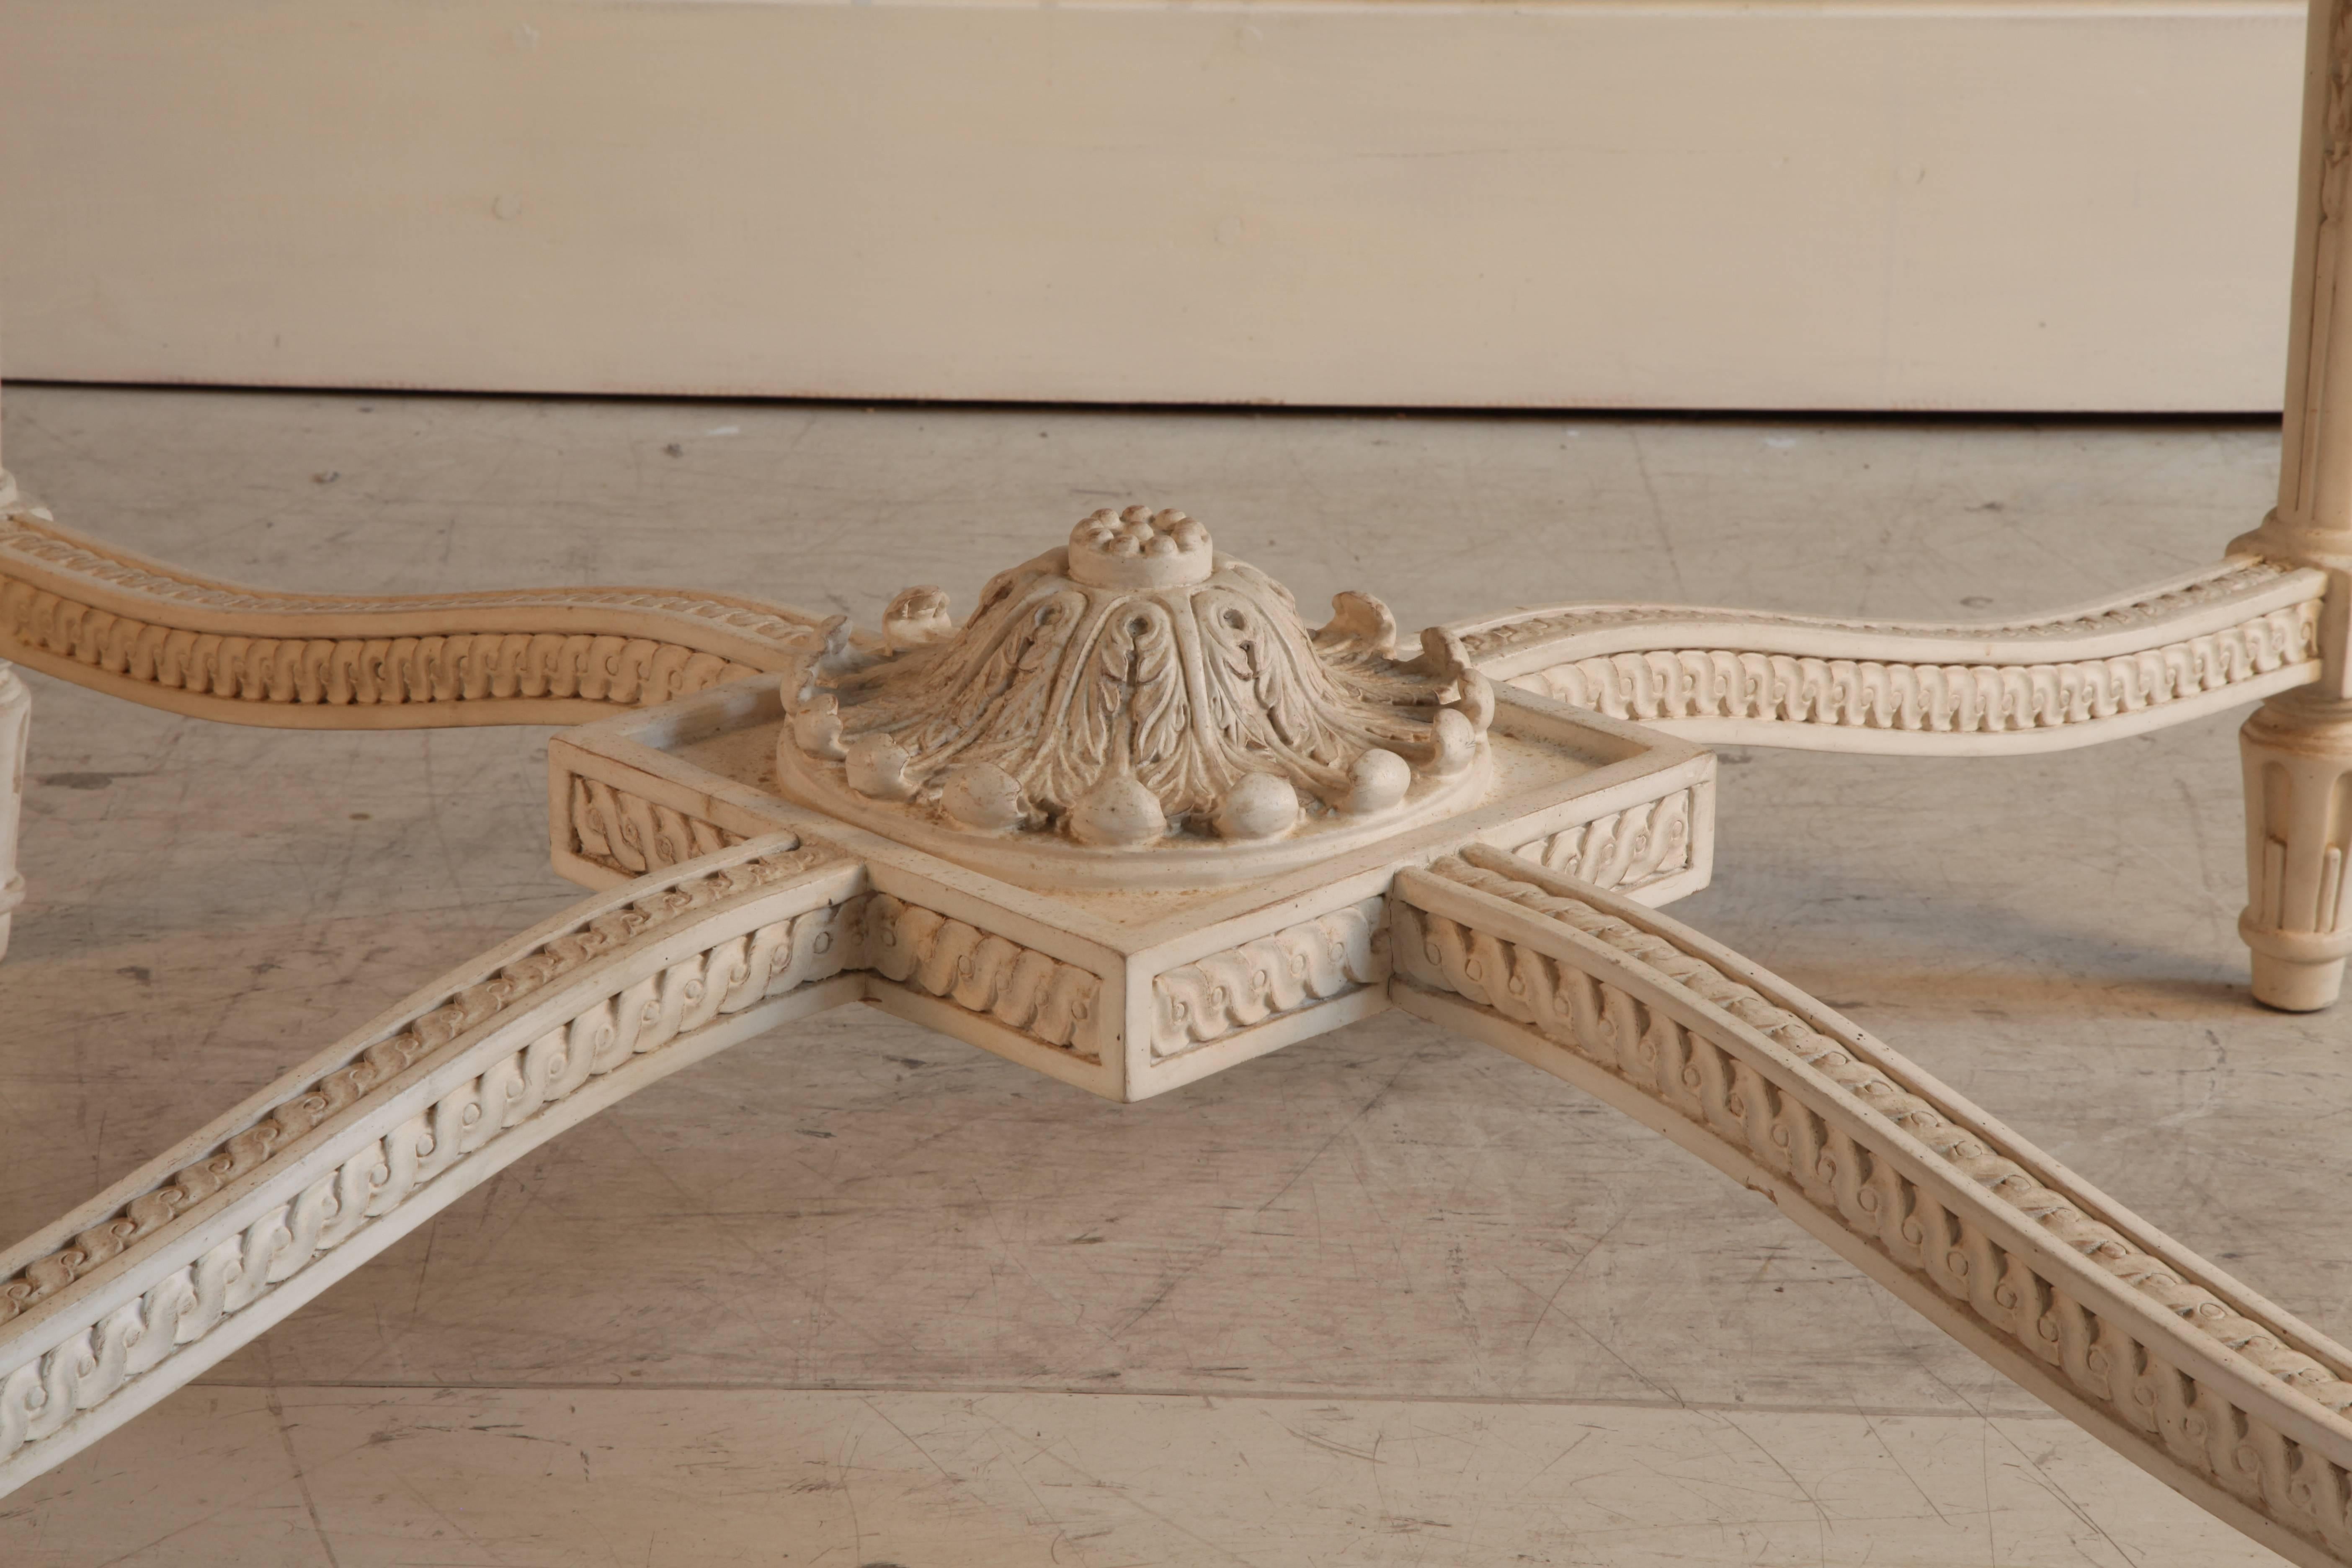 Hand-carved Louis XVI style round table, finished in a gesso white with a light french grey aged patina.
We can supply a marble top on quotation if you wish.